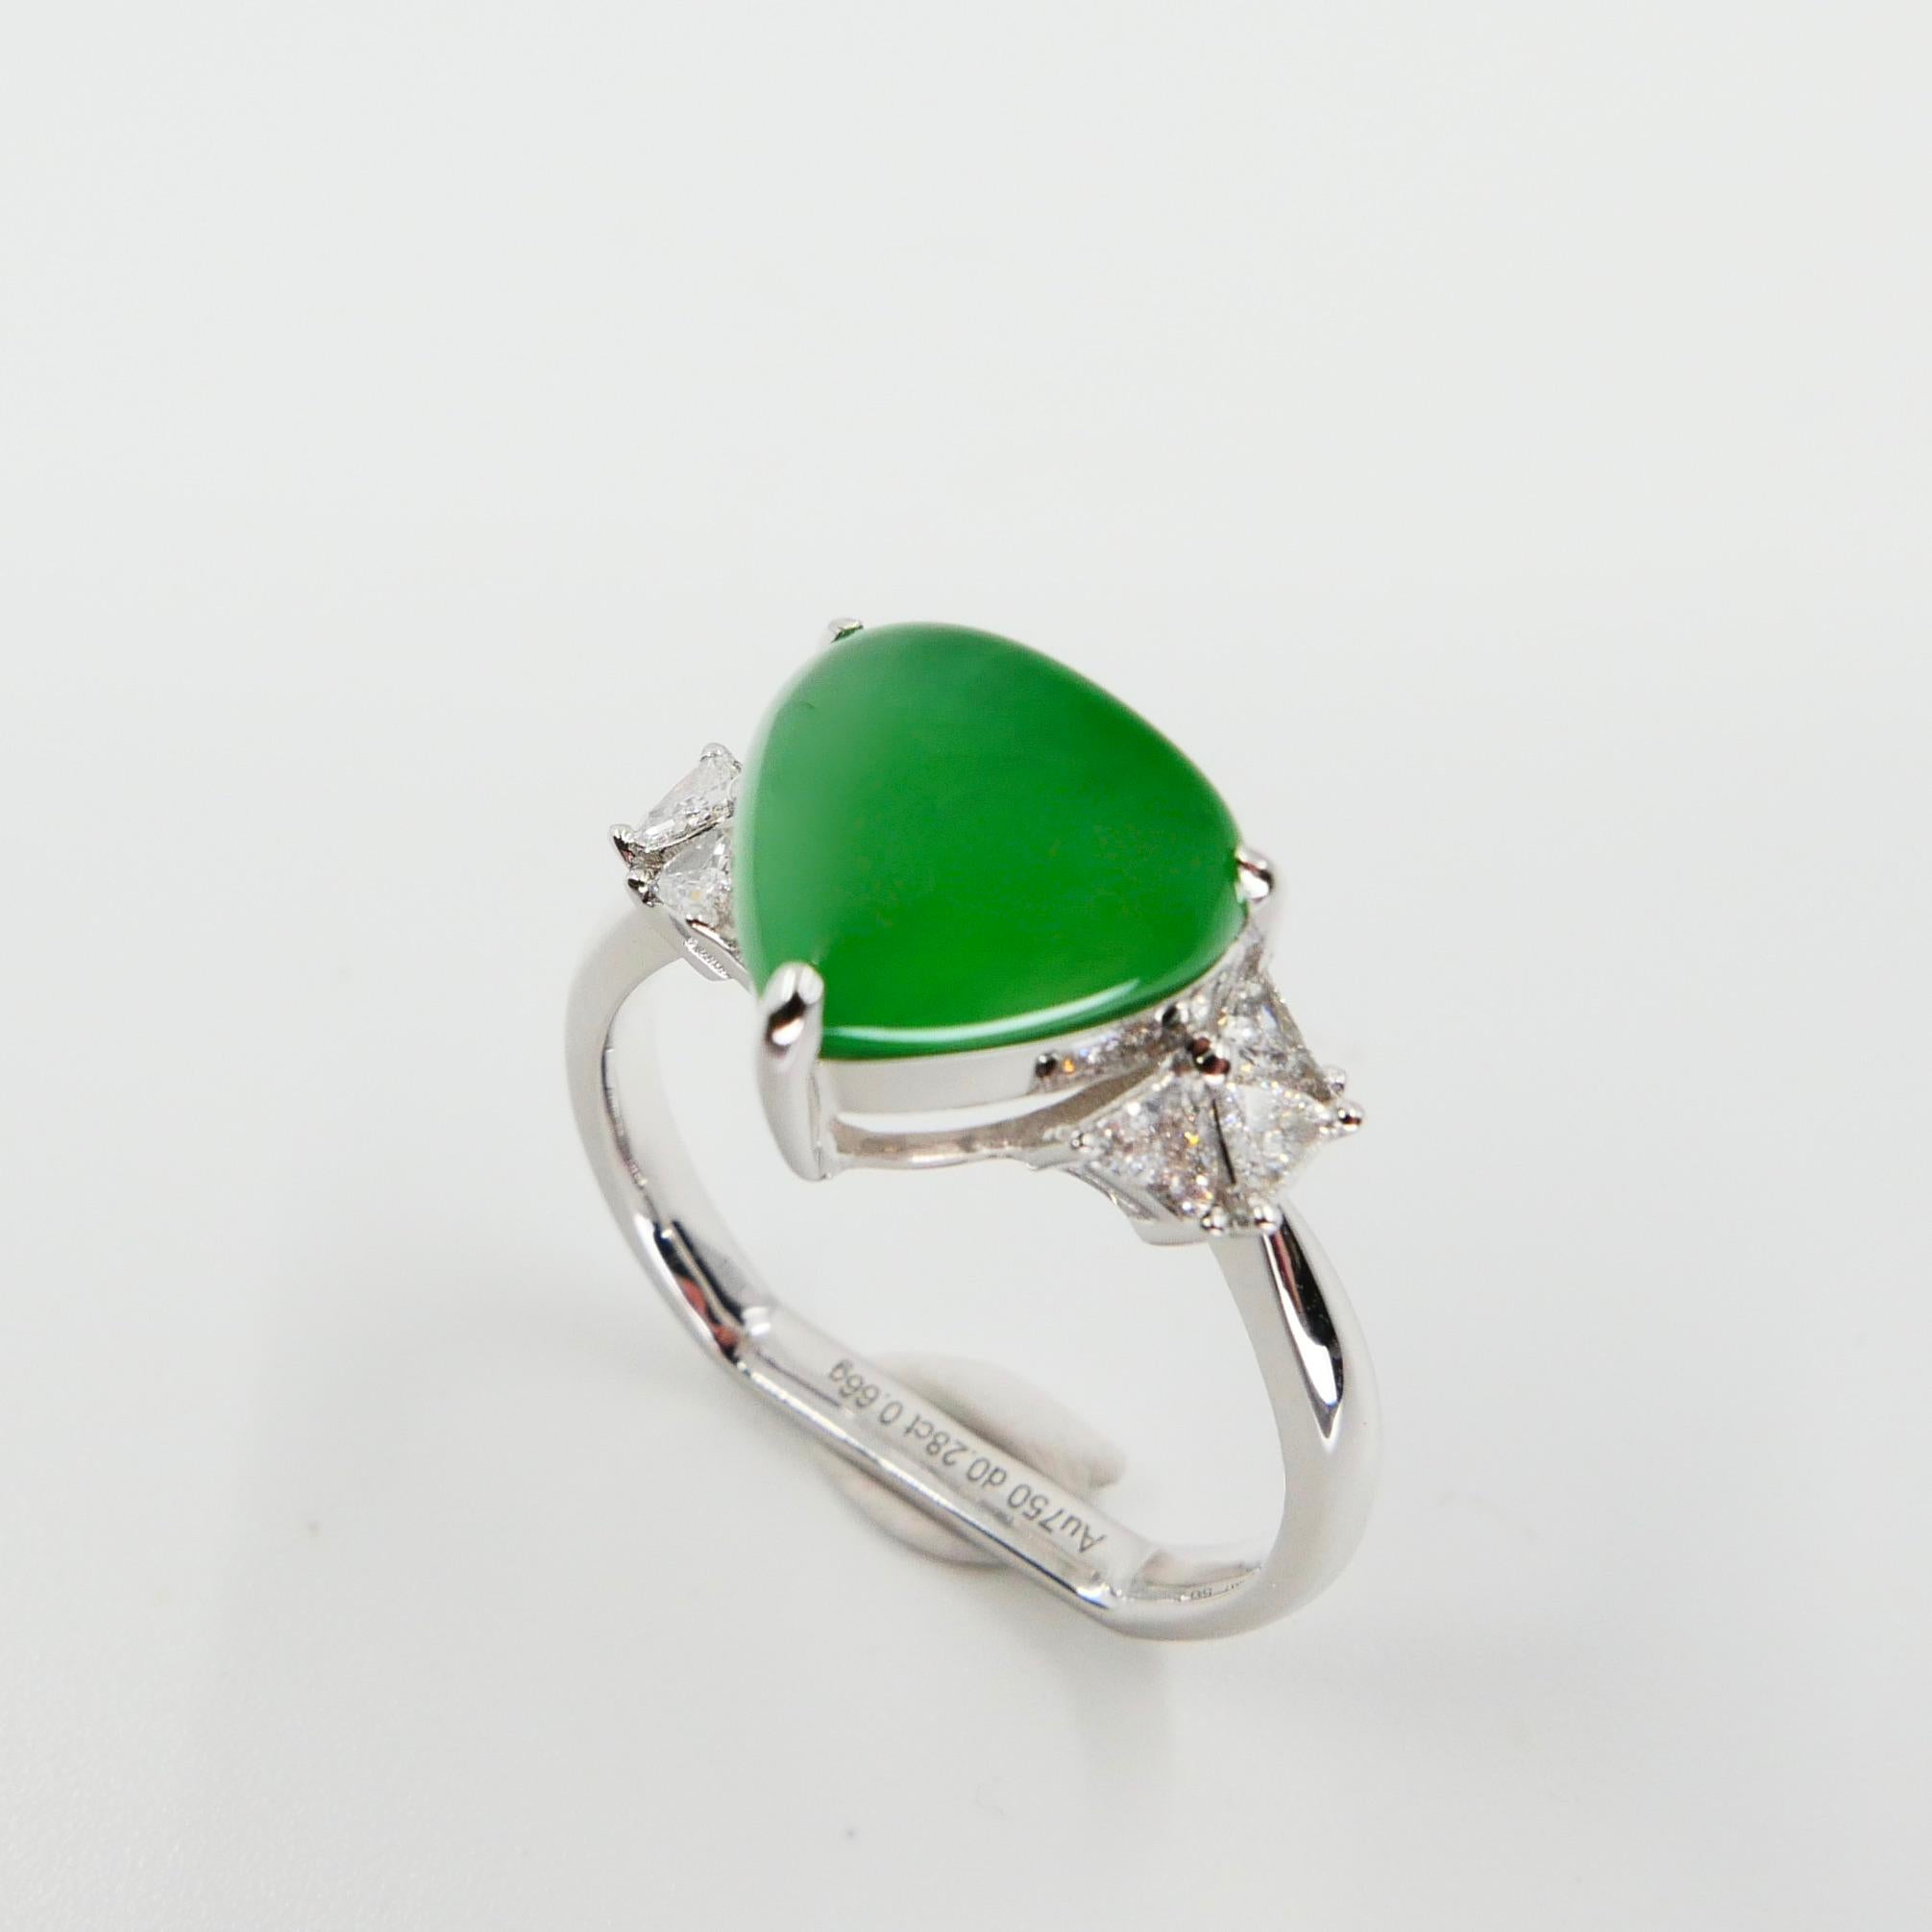 Certified Natural Type A Jadeite Jade & Diamond Cocktail Ring, Apple Green Color 8